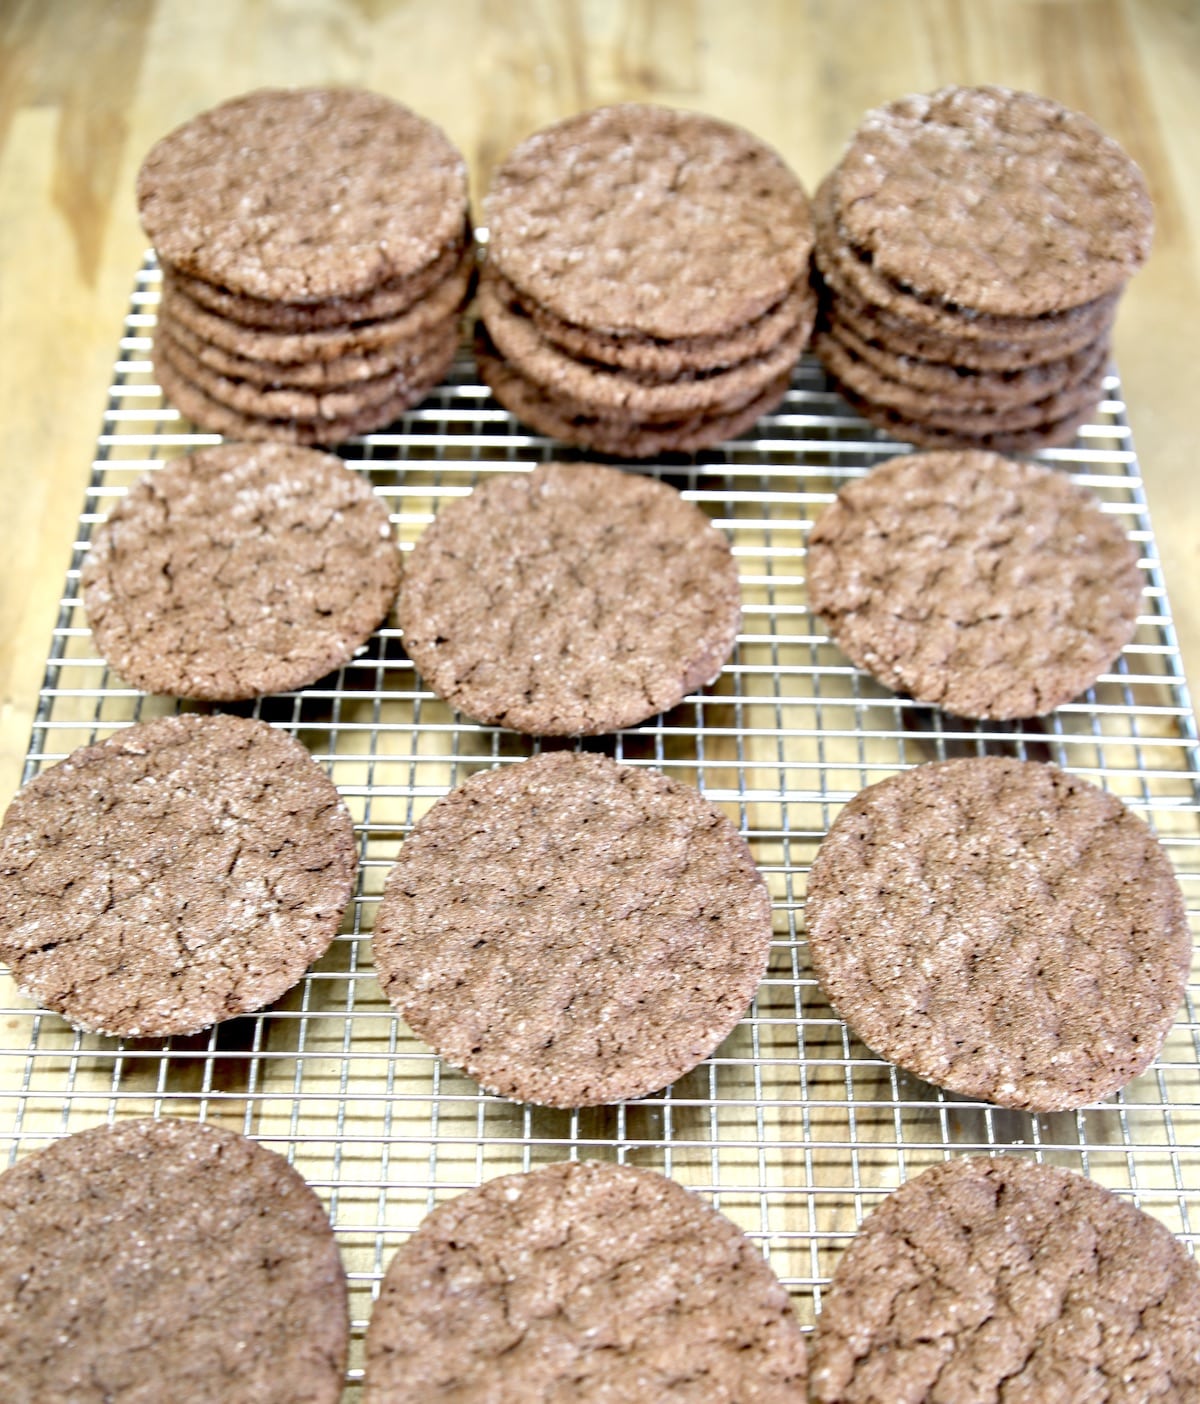 Baked chocolate cookies on a wire rack.